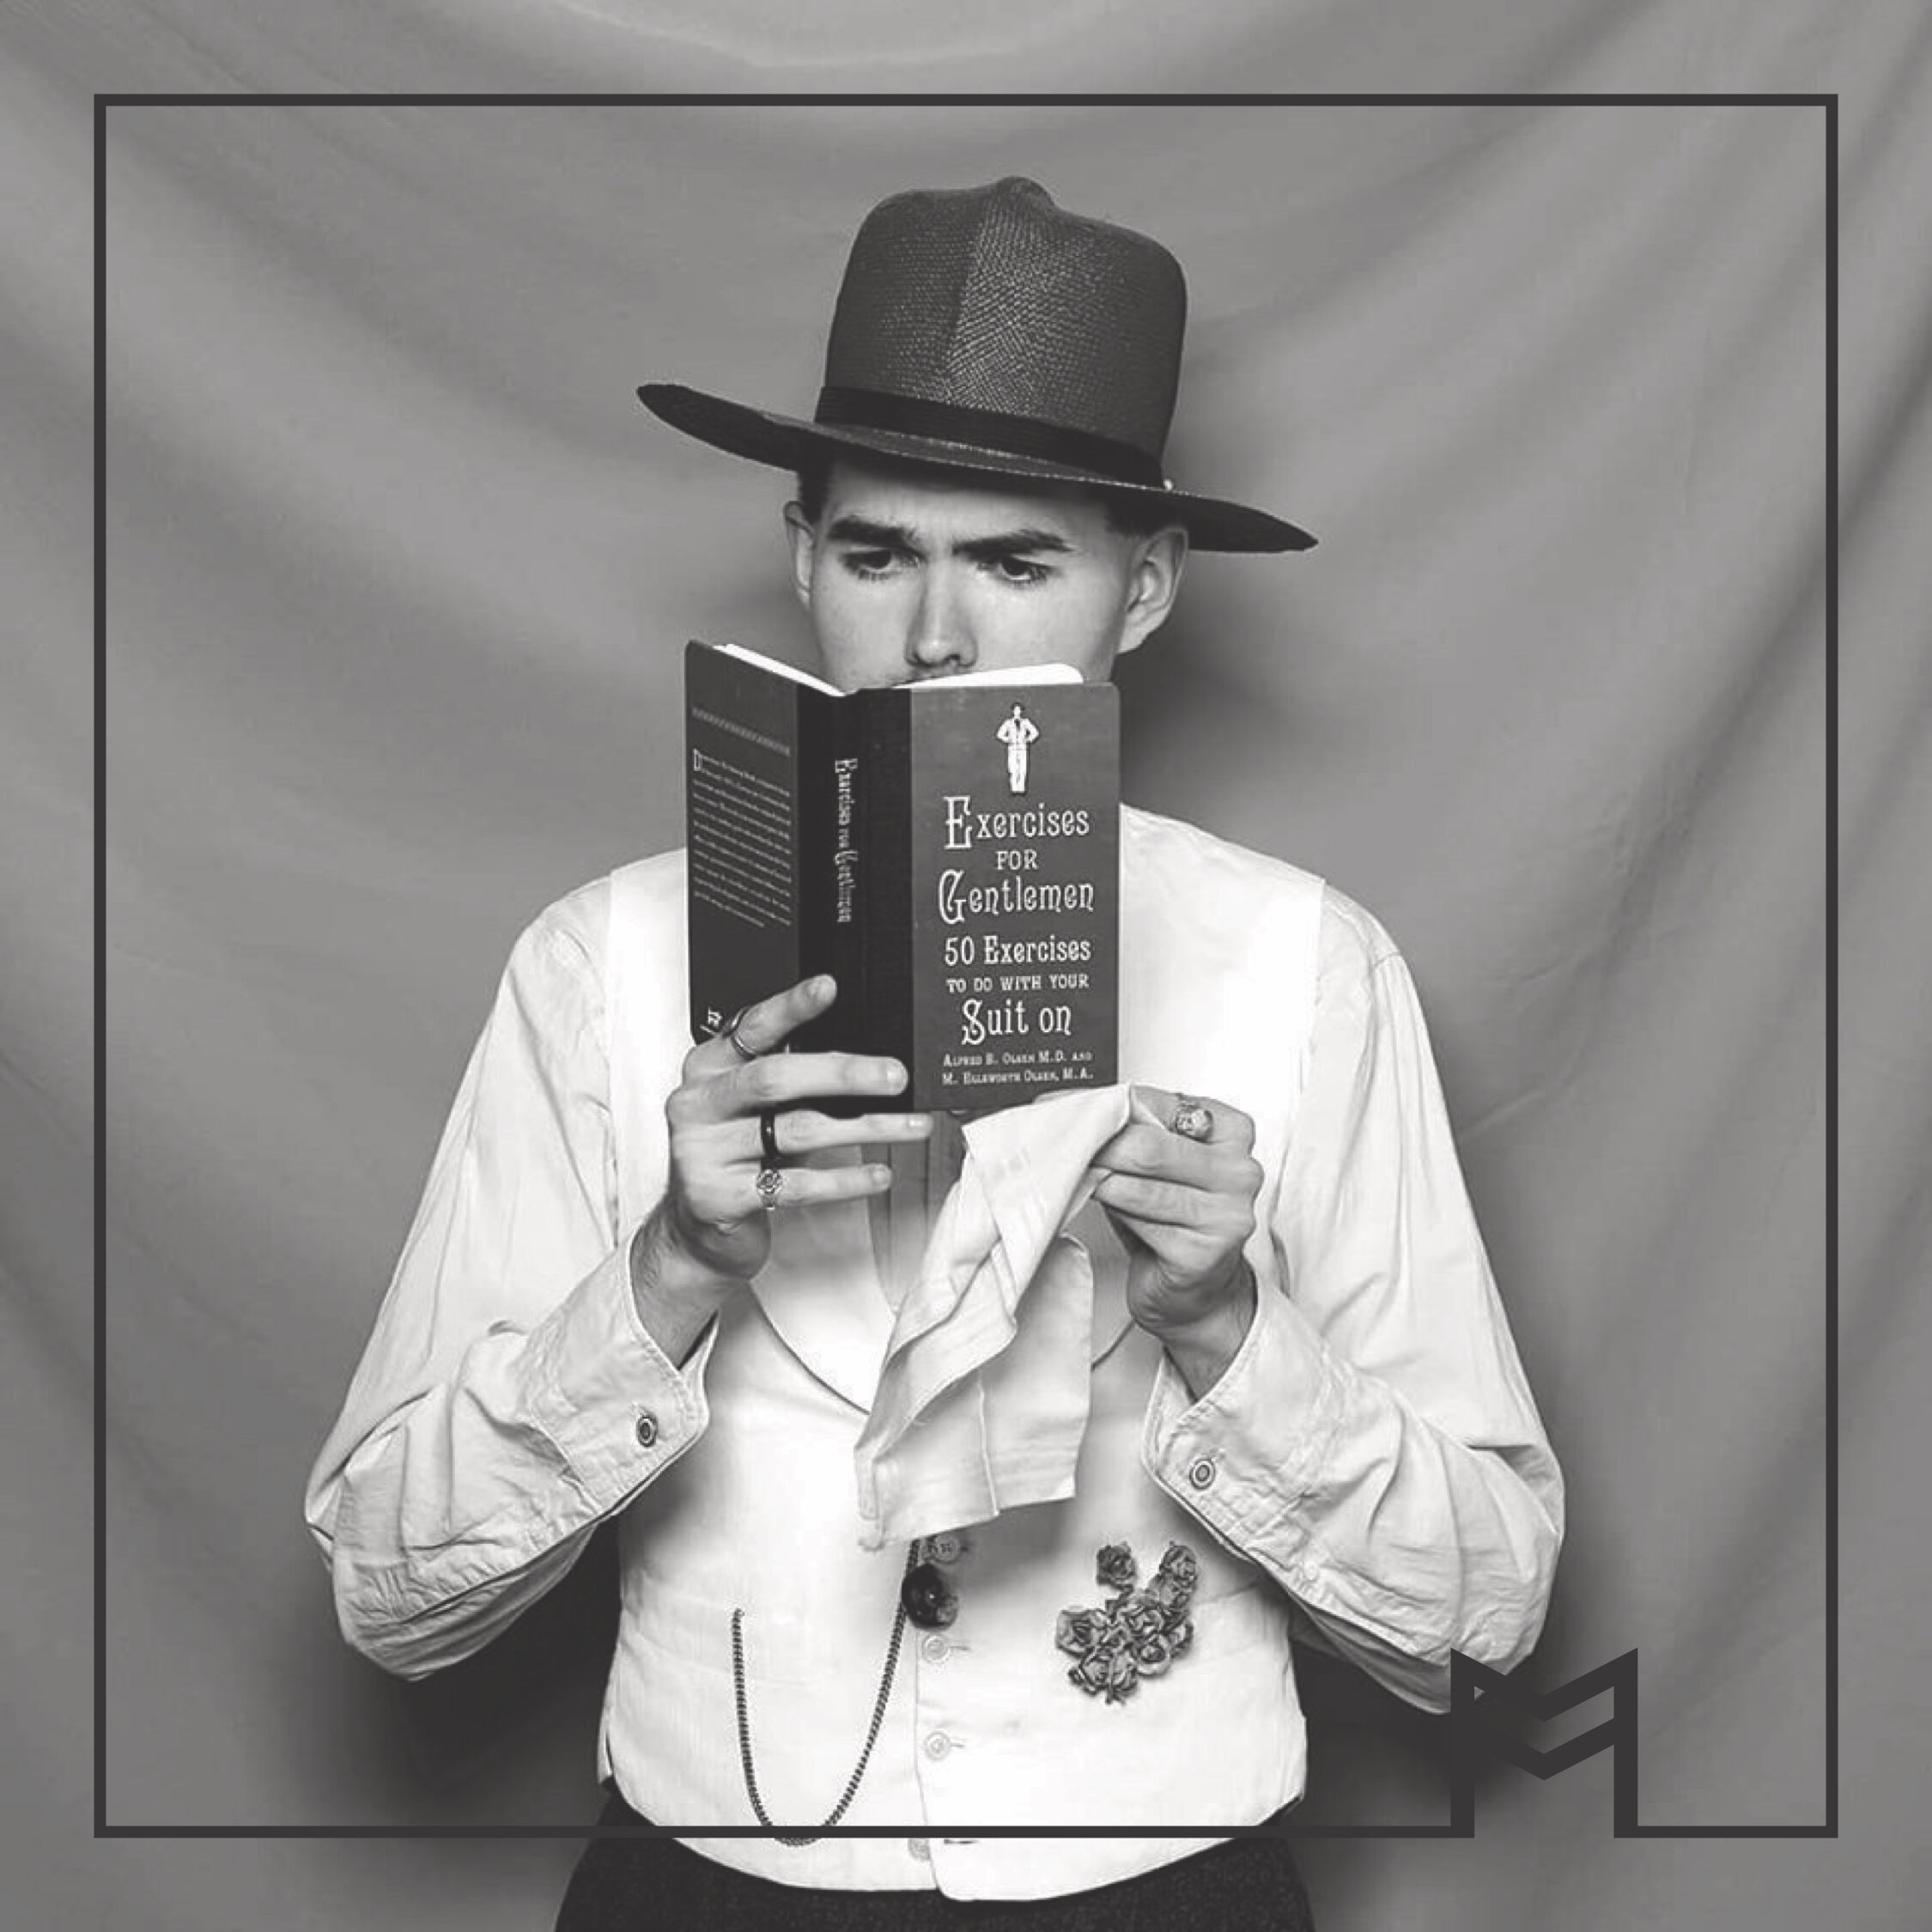 black and white image of a person wearing a hat and reading a book